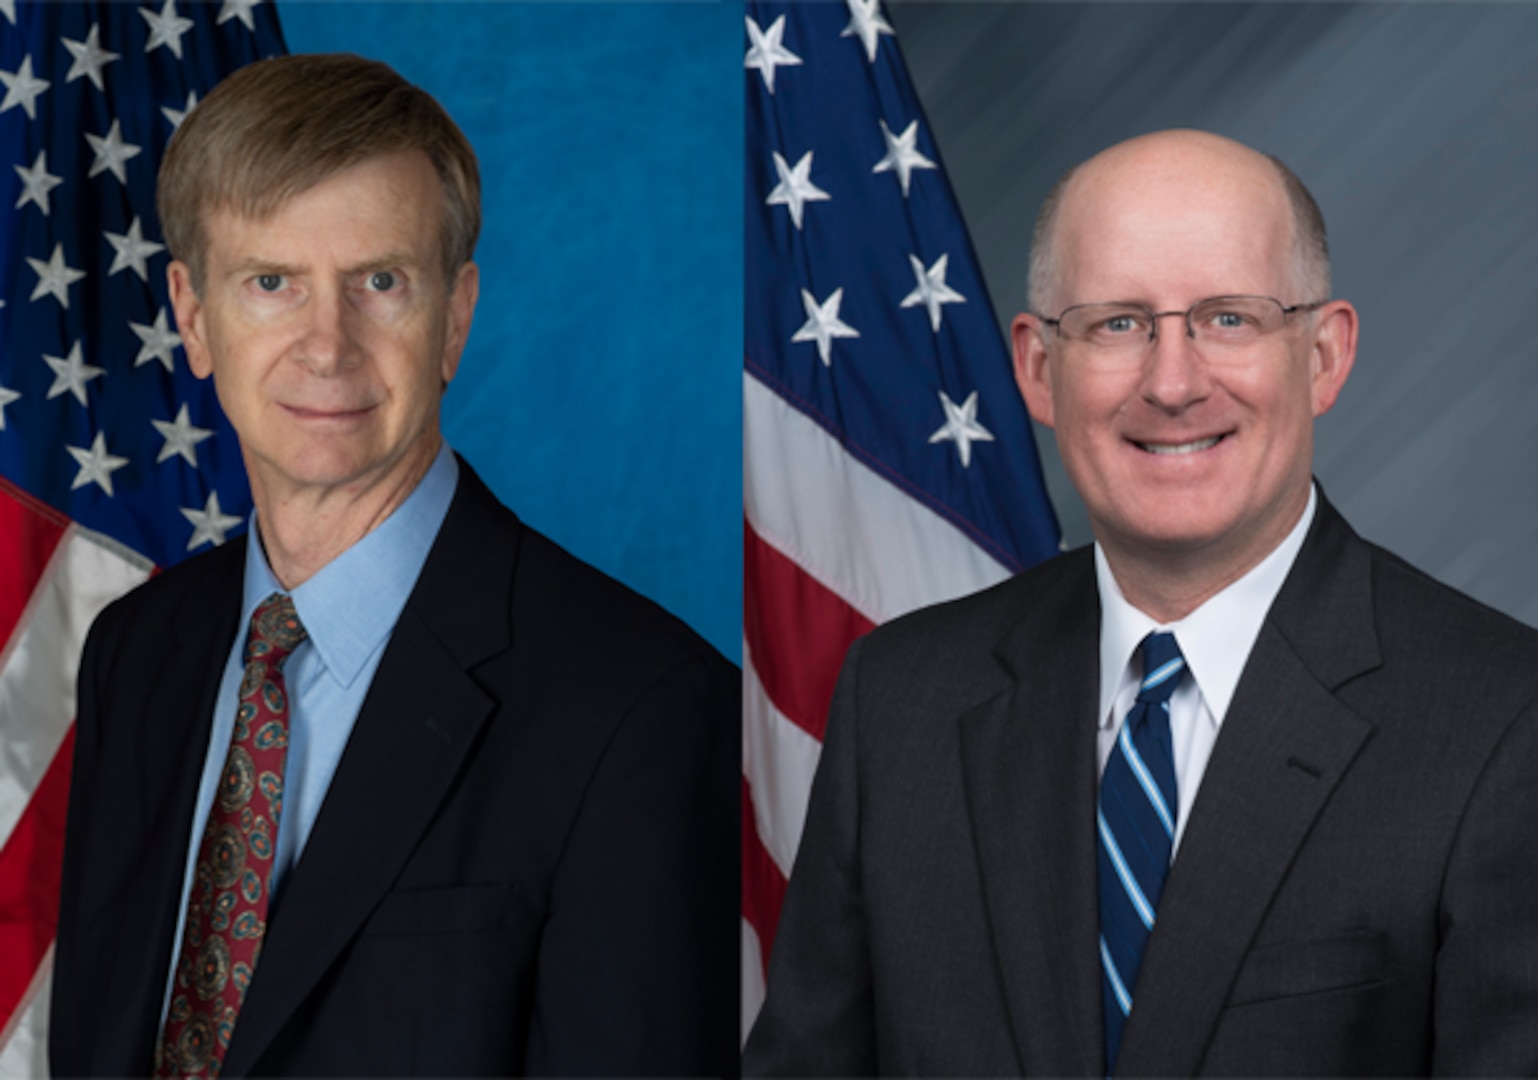 (left to right) Dr. Kerry Commander and Dr. K. Todd Holland, both scientists from Naval Surface Warfare Center Panama City Division, received a 2022 National Defense Industrial Association (NDIA) Award. Commander, NSWC PCD chief technology officer, was selected as the 2022 recipient of the Vice Admiral Charles B. Martell - David Bushnell Award and Holland, NSWC PCD director of Mine Warfare Prototyping, was selected as one of three recipients for the 2022 NDIA Bronze Medal. (U.S. Navy photos)